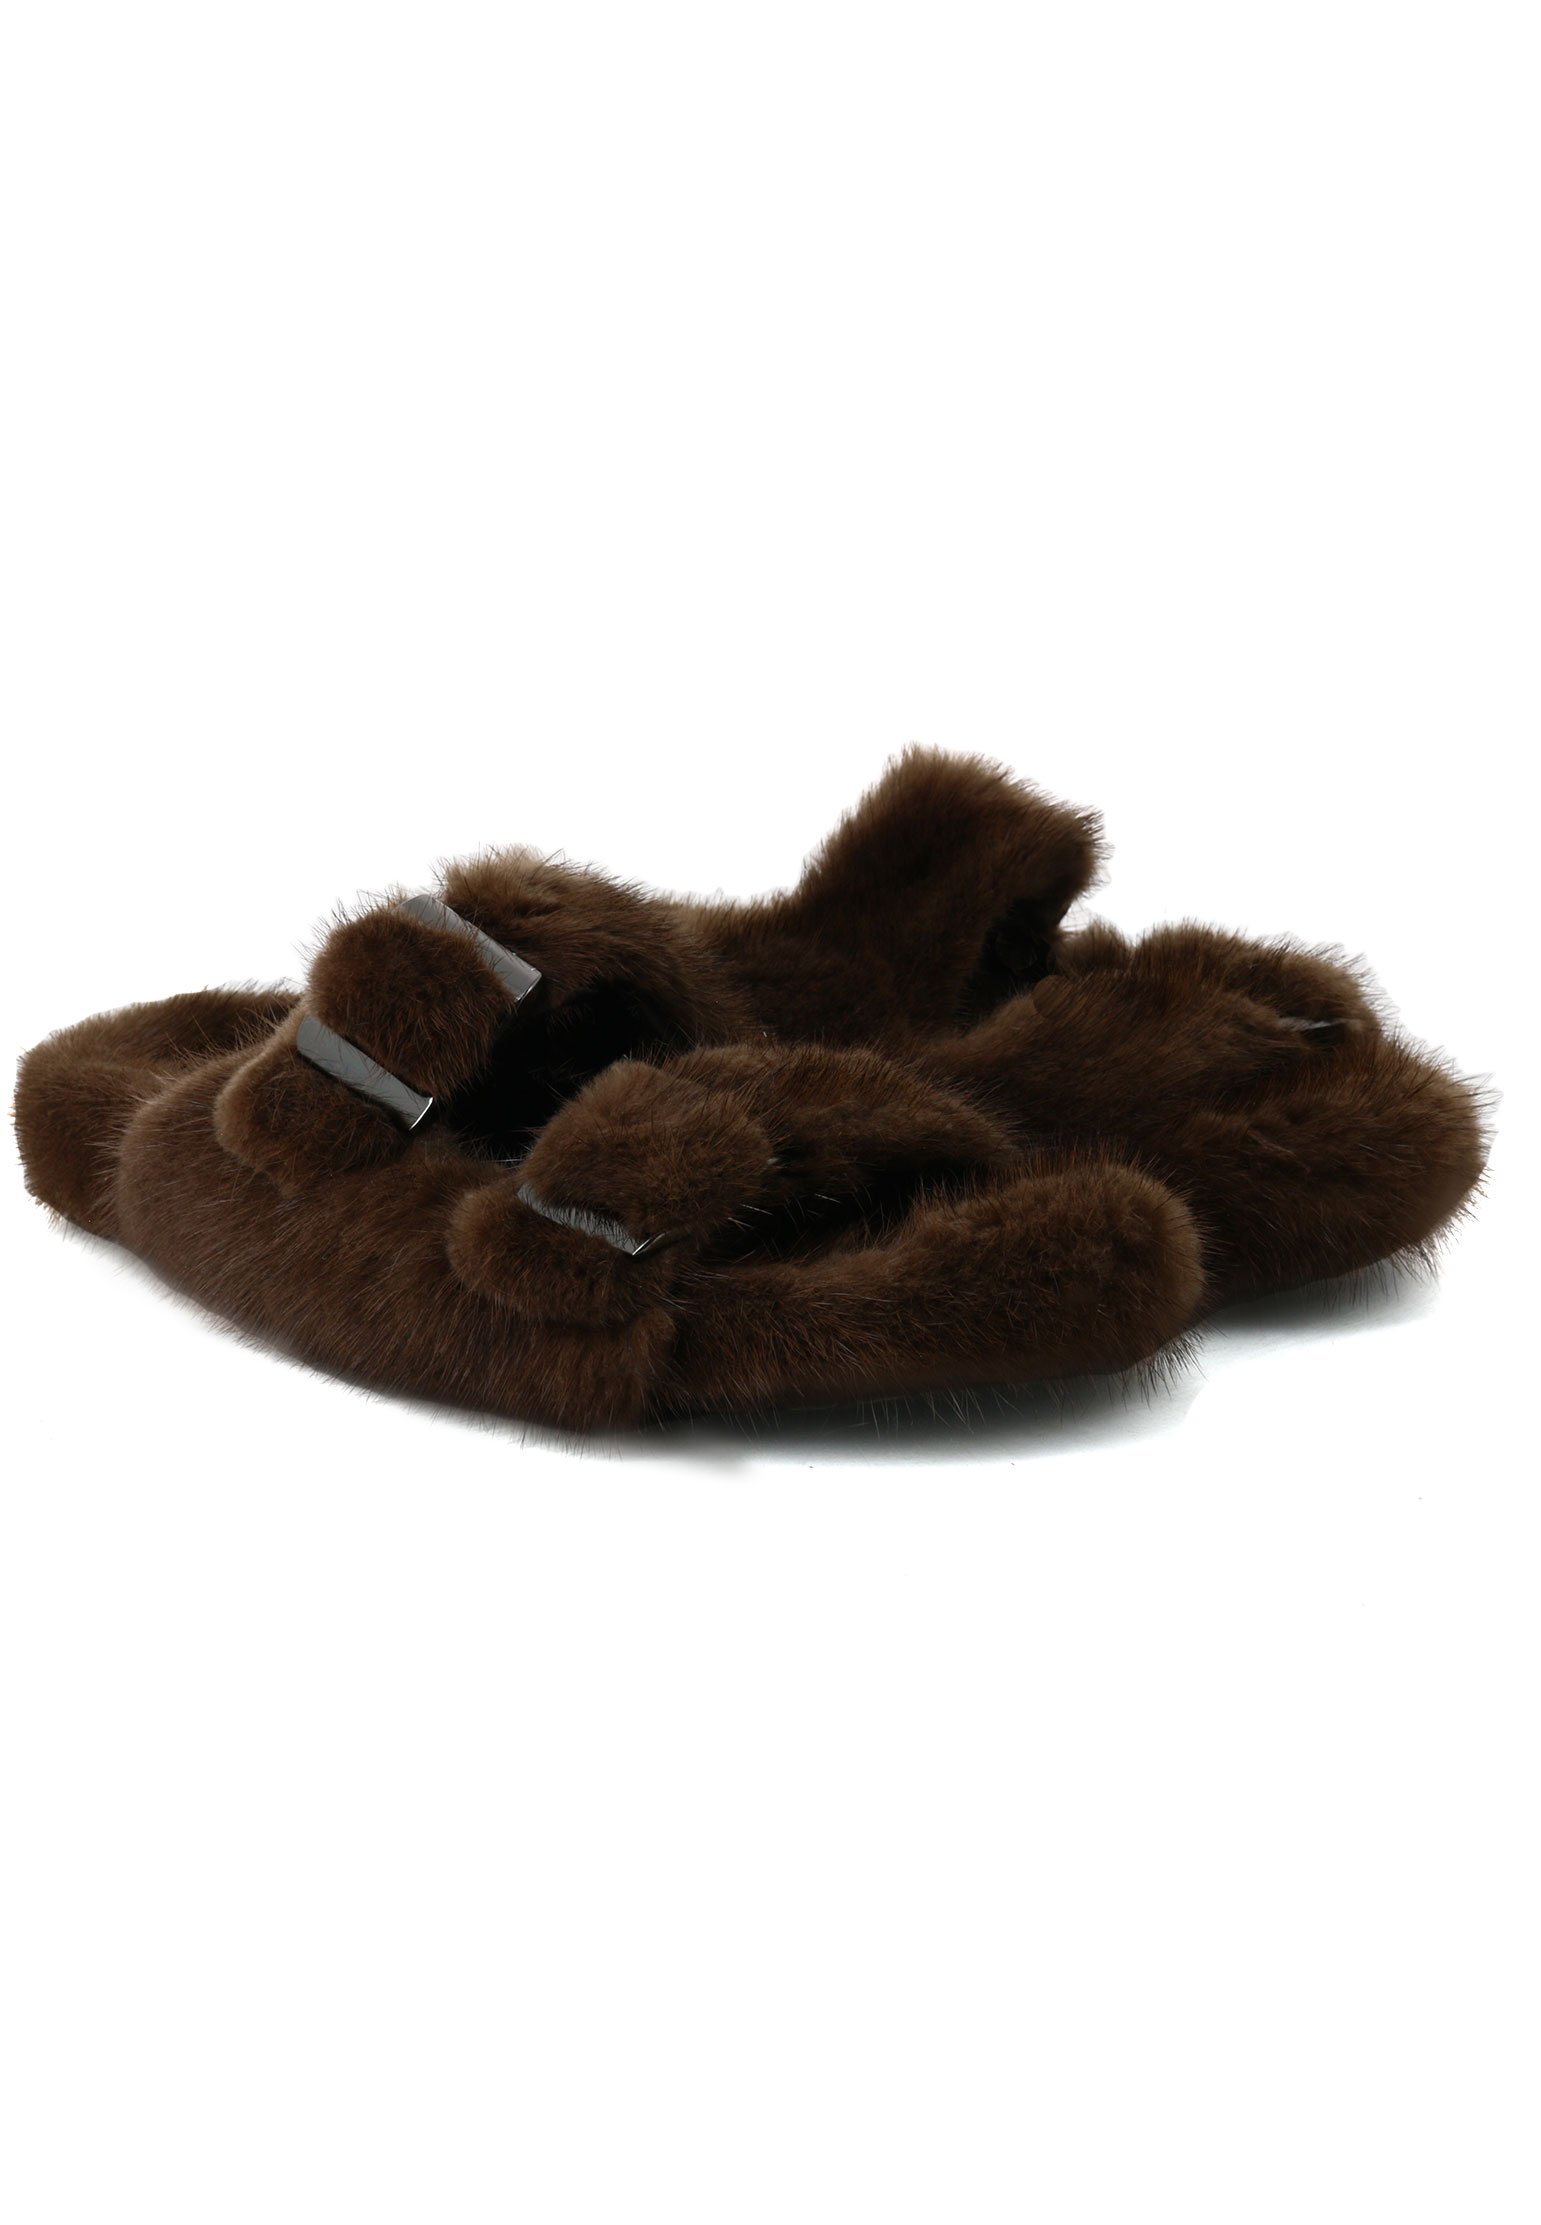 Slippers SAM RONE Color: brown (Code: 217) in online store Allure